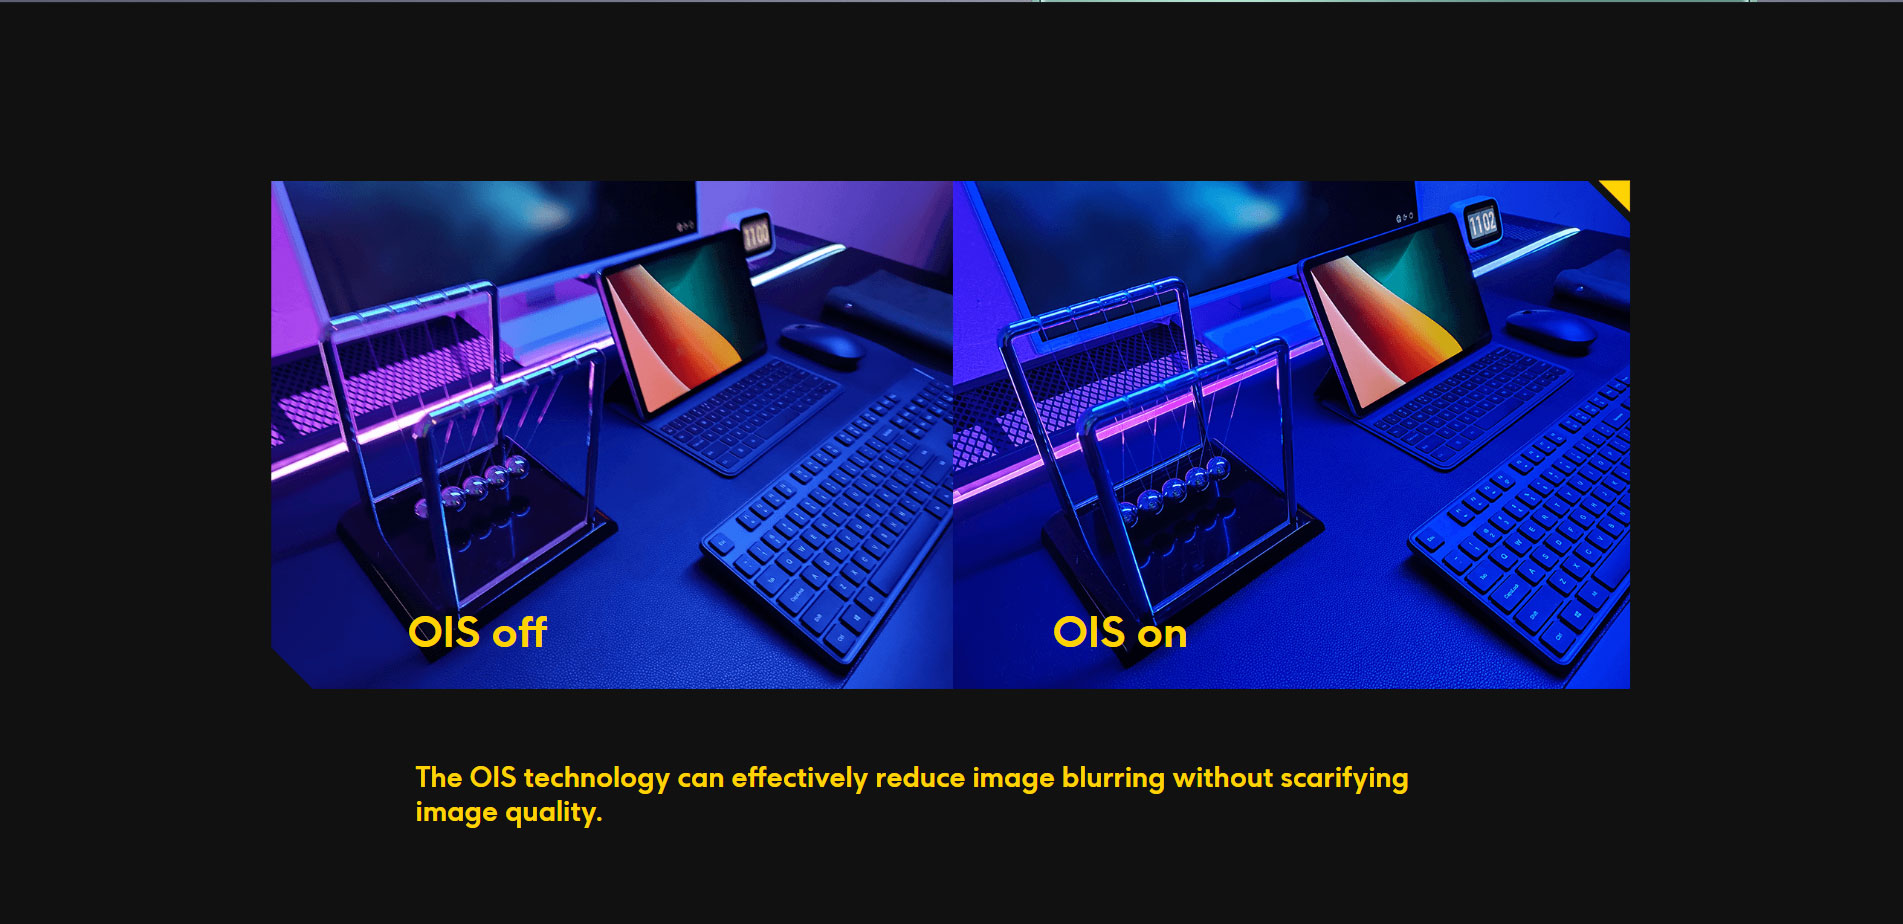 The OIS technology can effectively reduce image blurring without scarifying image quality.